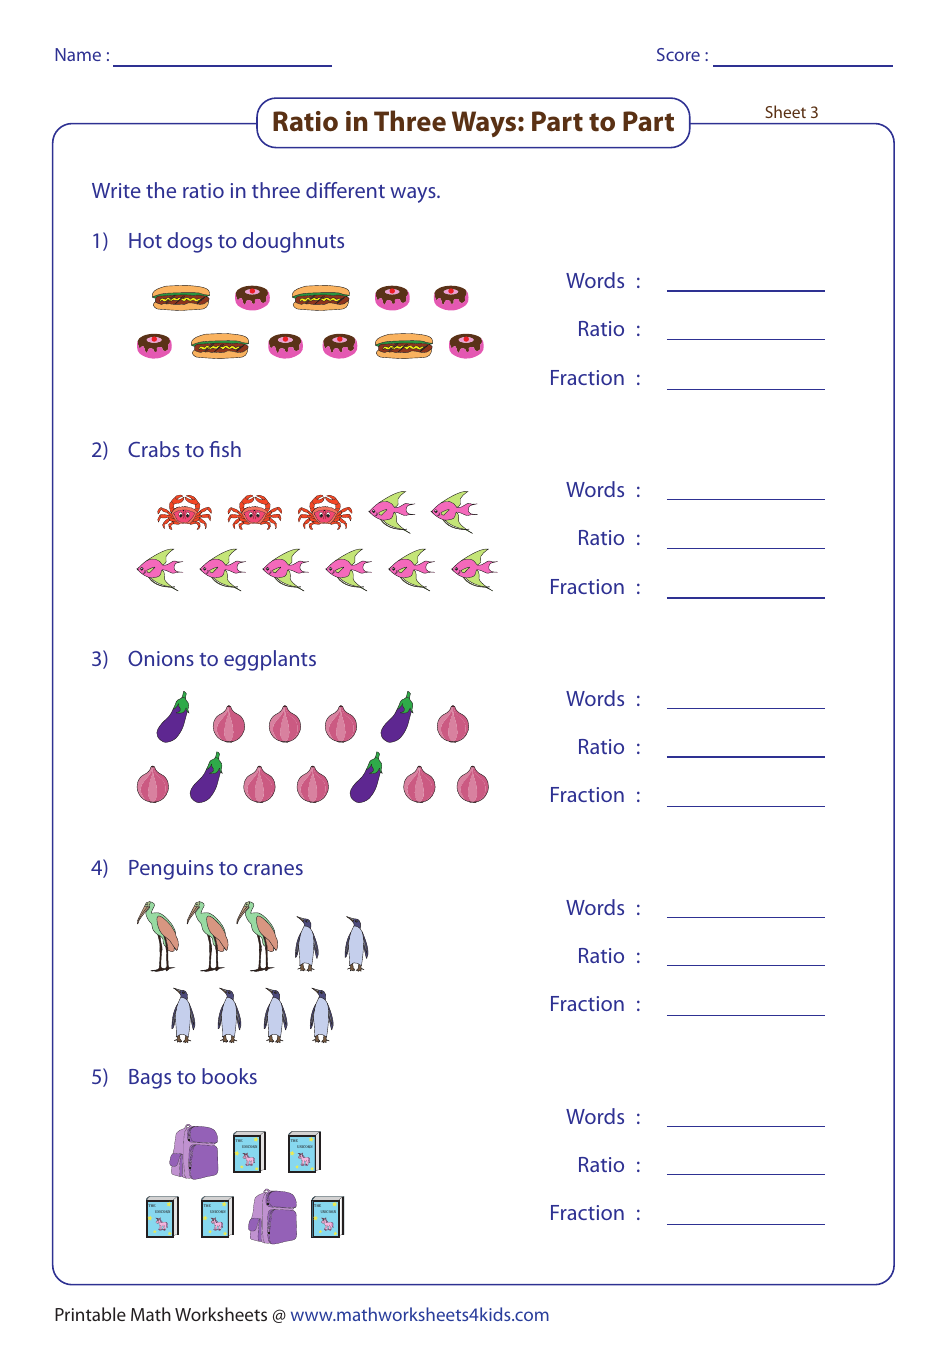 simplifying-fractions-worksheet-with-answers-sat-math-practice-worksheets-with-answers-lyman